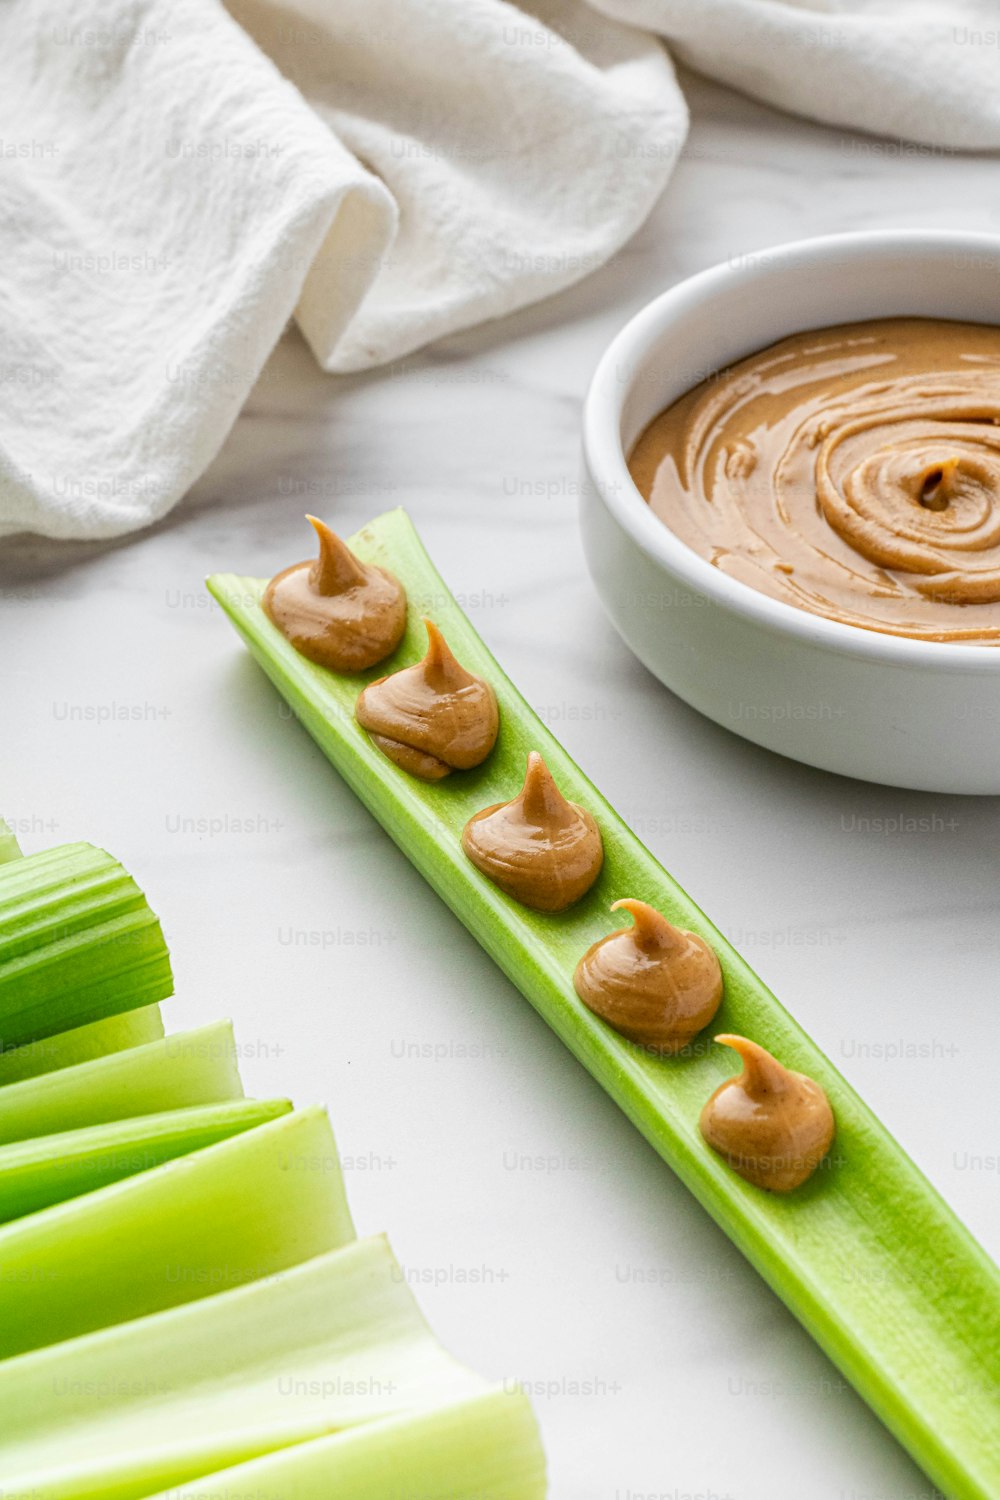 a bowl of peanut butter and celery on a table